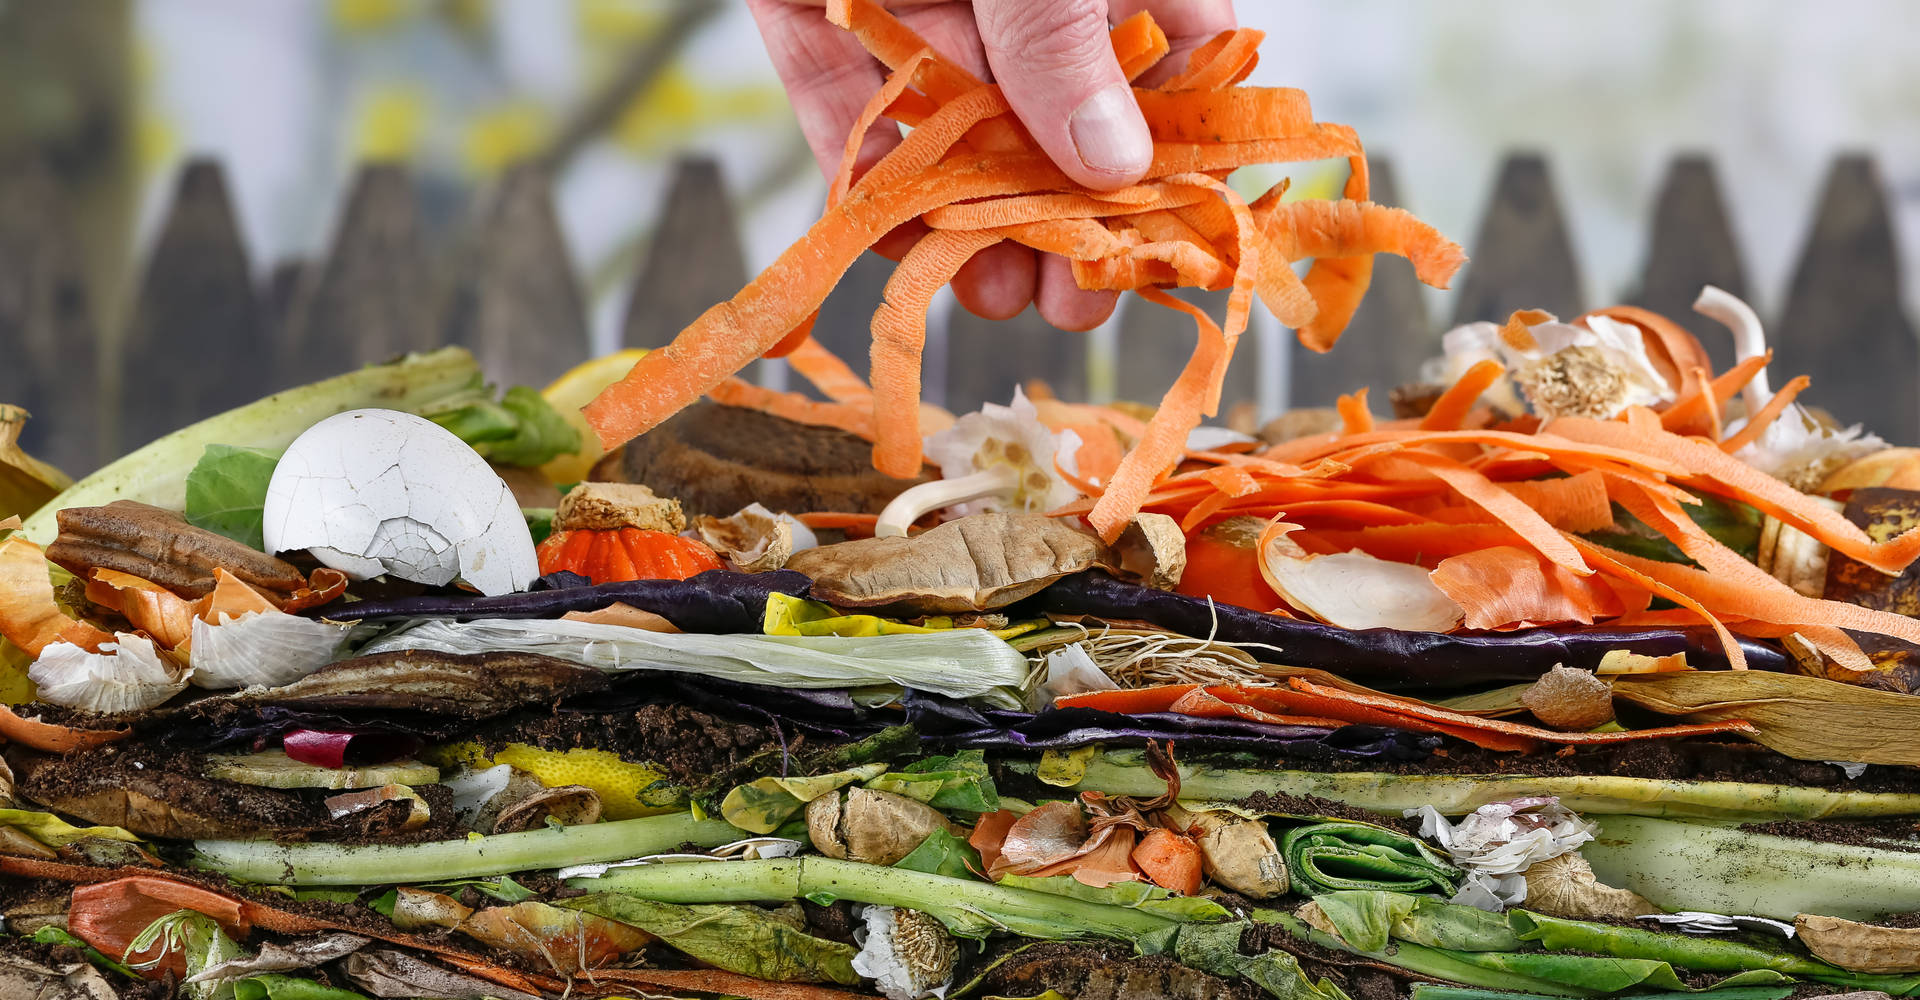 Compost. Vegetable peels, egg shells and other organic waste for composting. A stock photo.